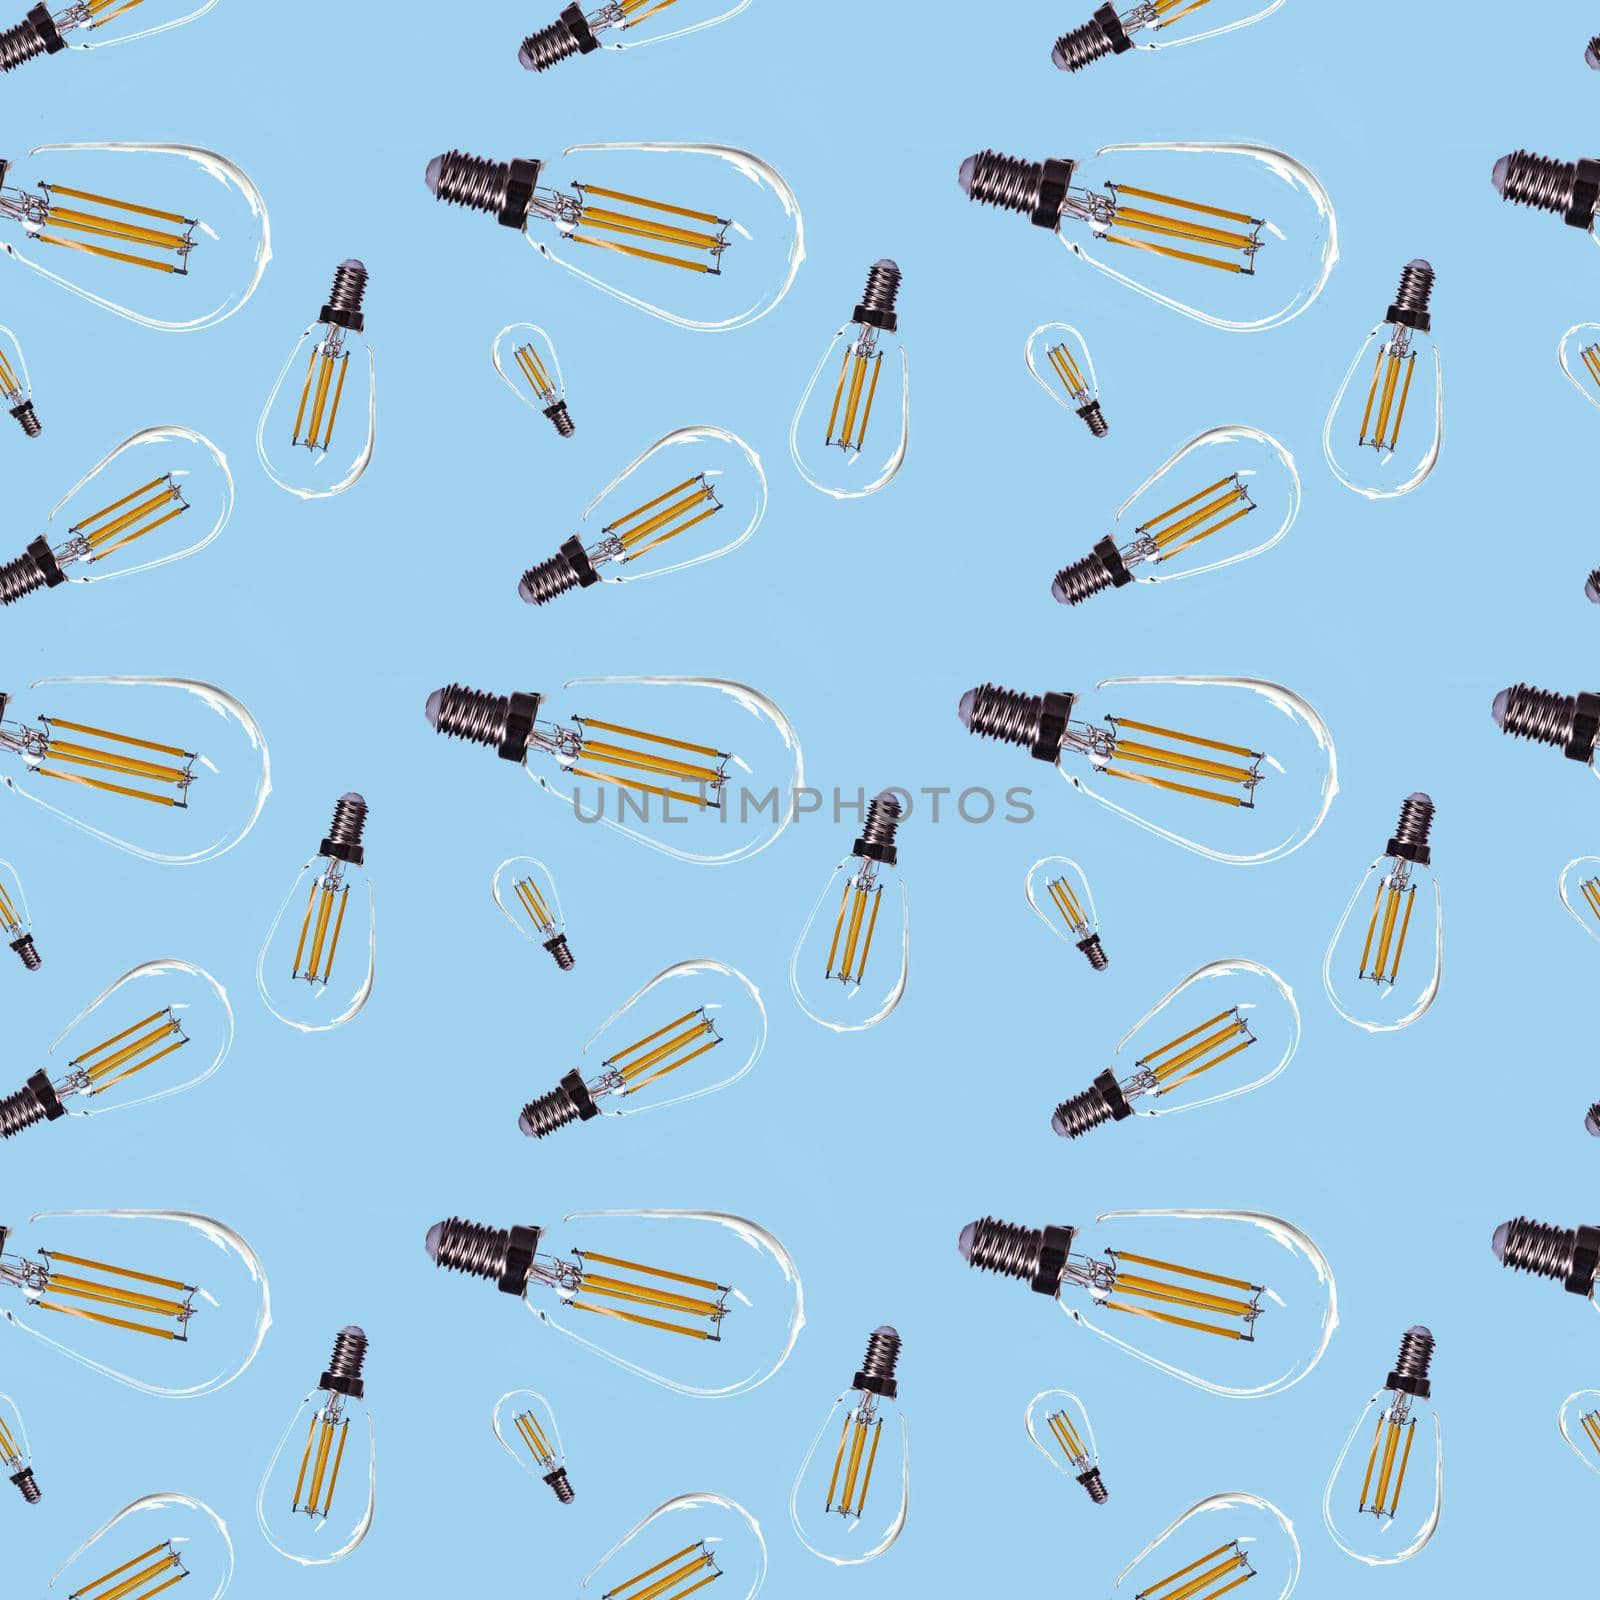 Seamless pattern in the form of electric lamps of different sizes on a blue background. by bySergPo